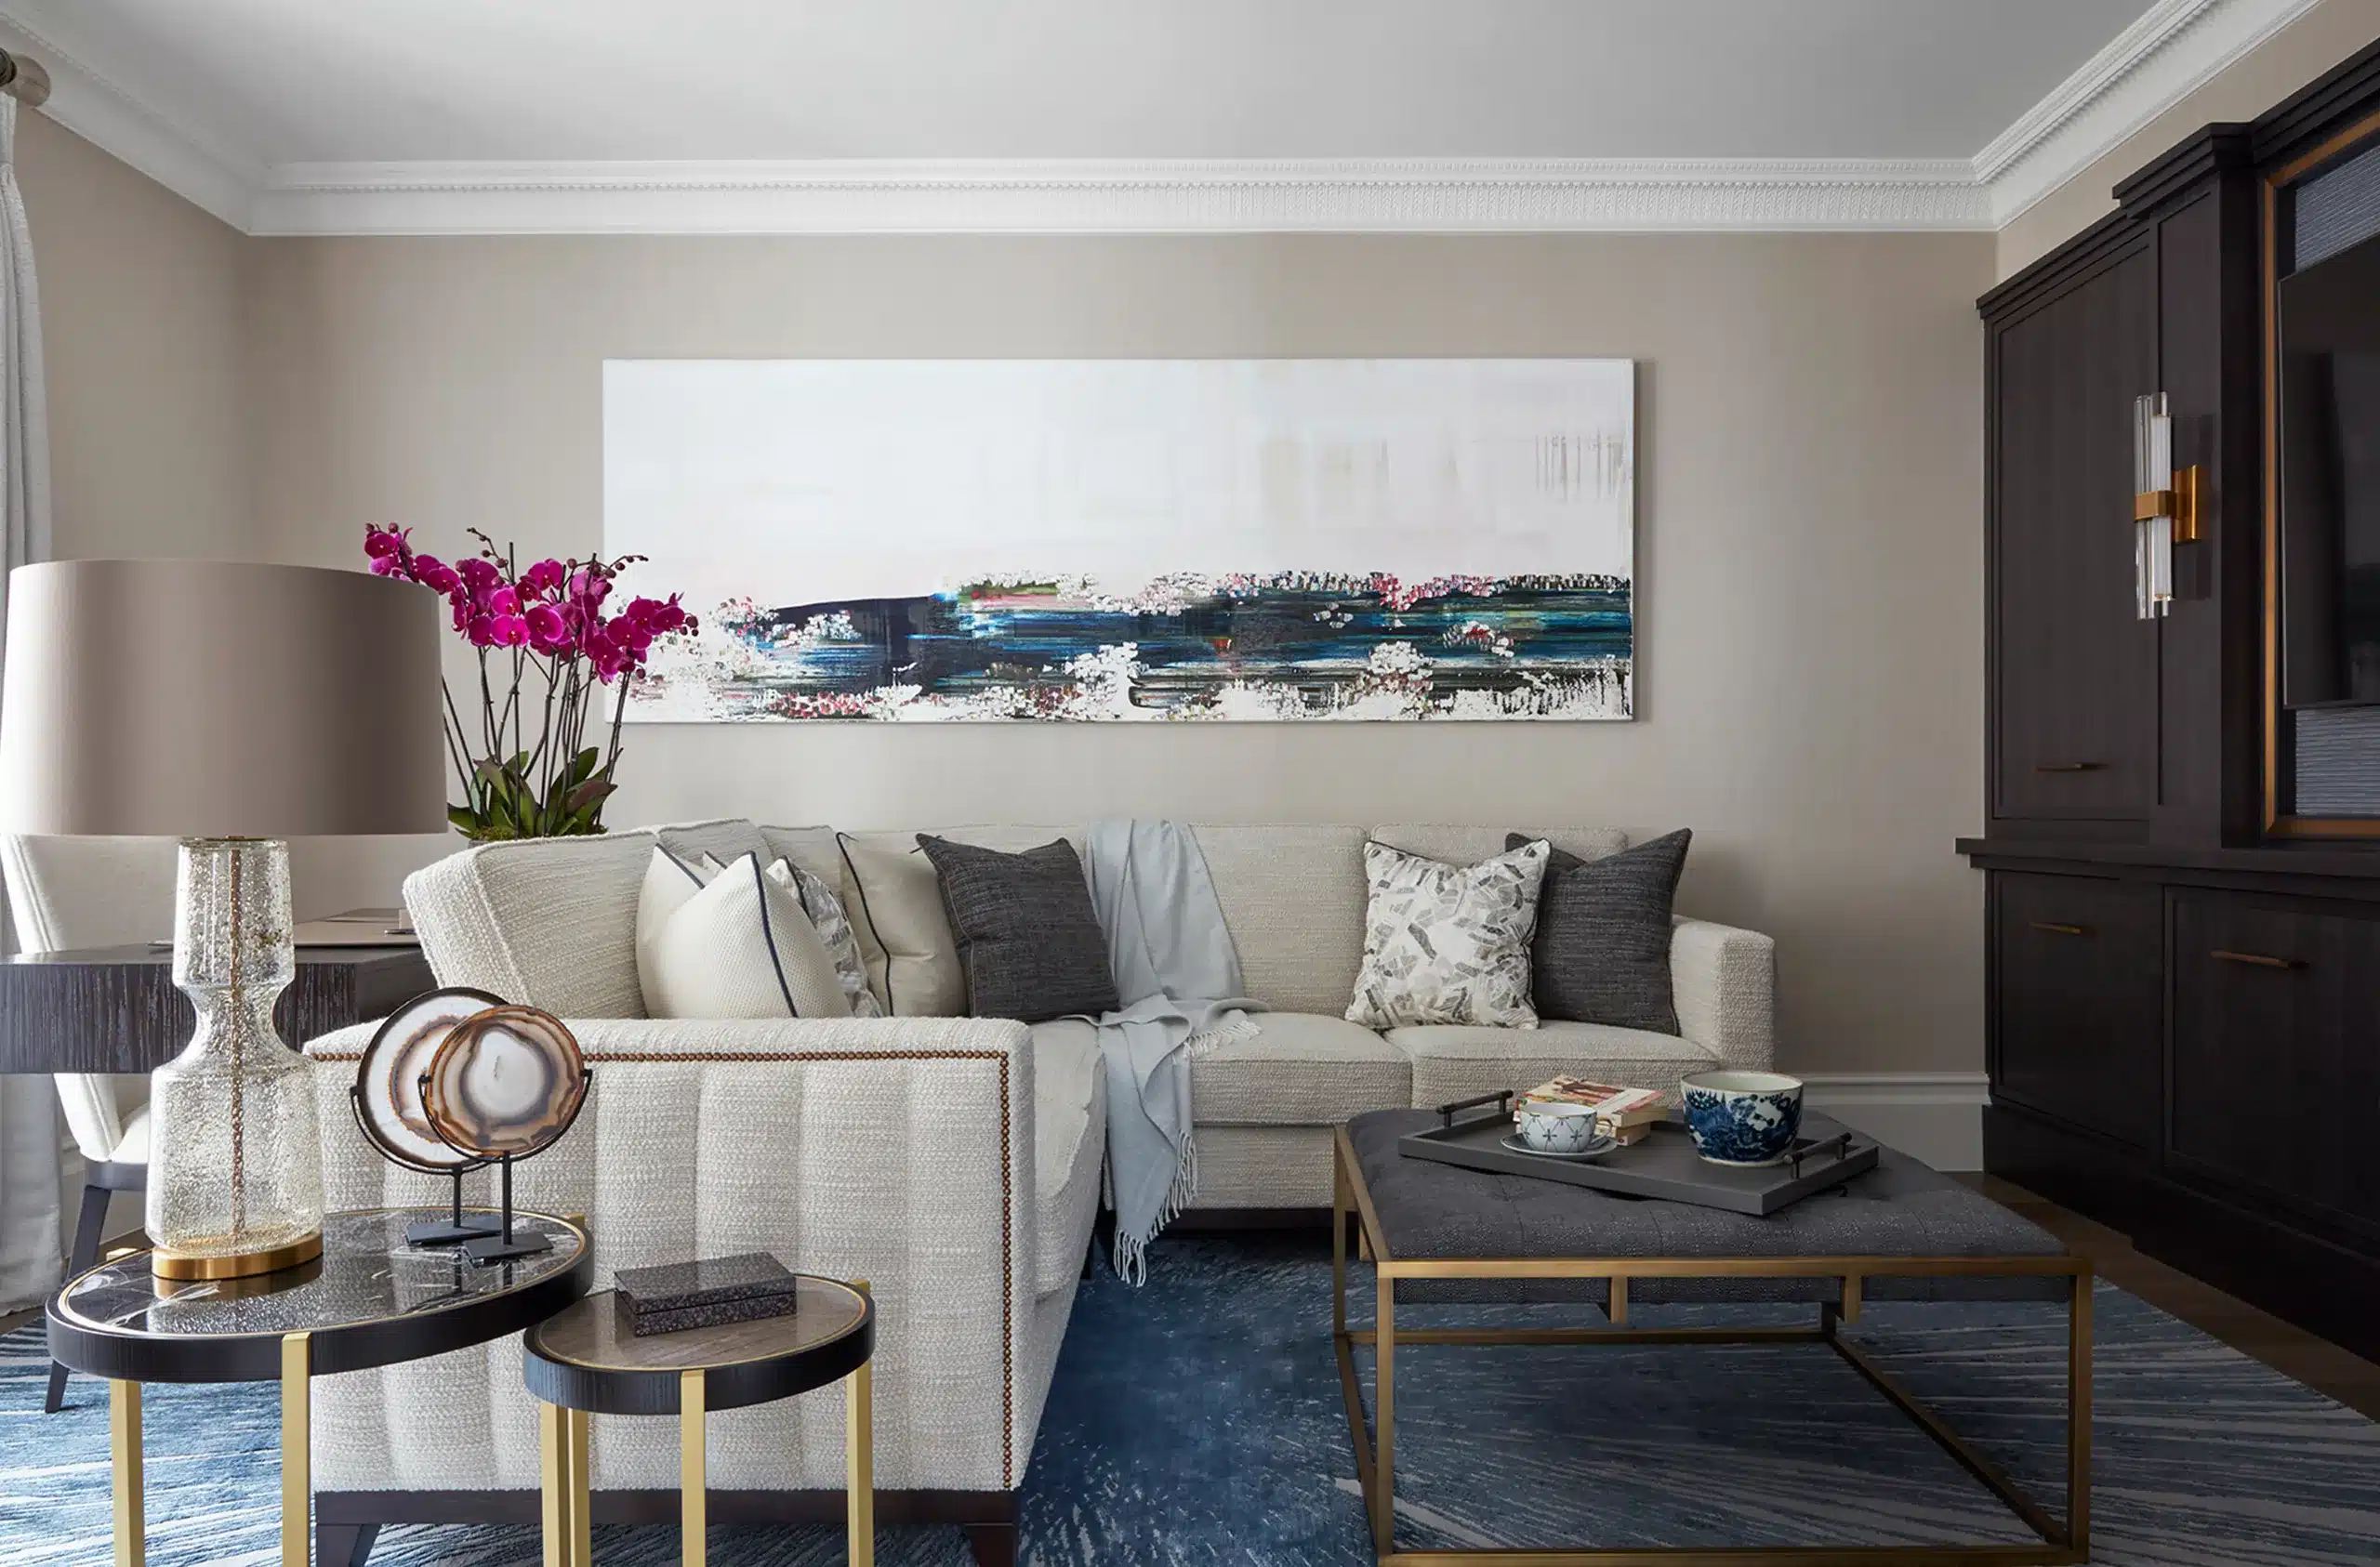 A study in a kensington interior design project by katharine pooley, the uk's best interior designer